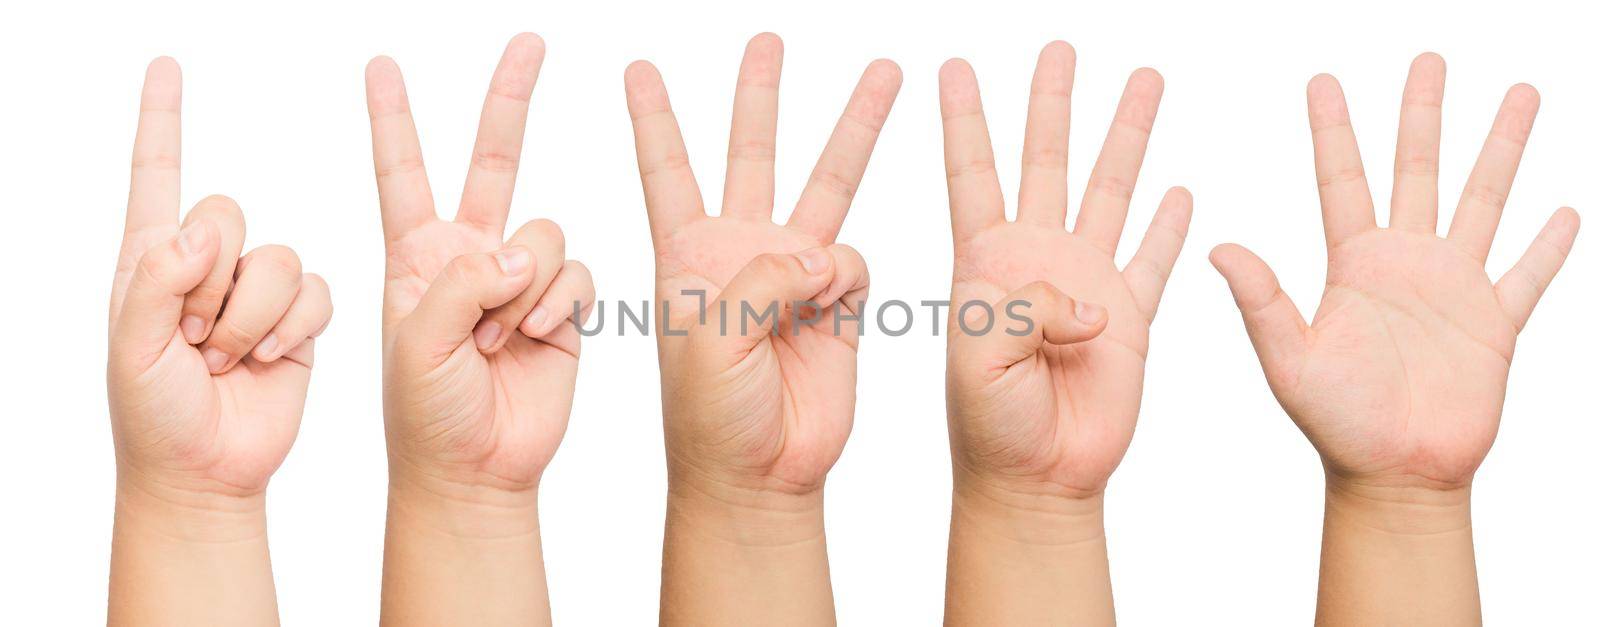 people count by finger 1 to 5 front and back by whatwolf